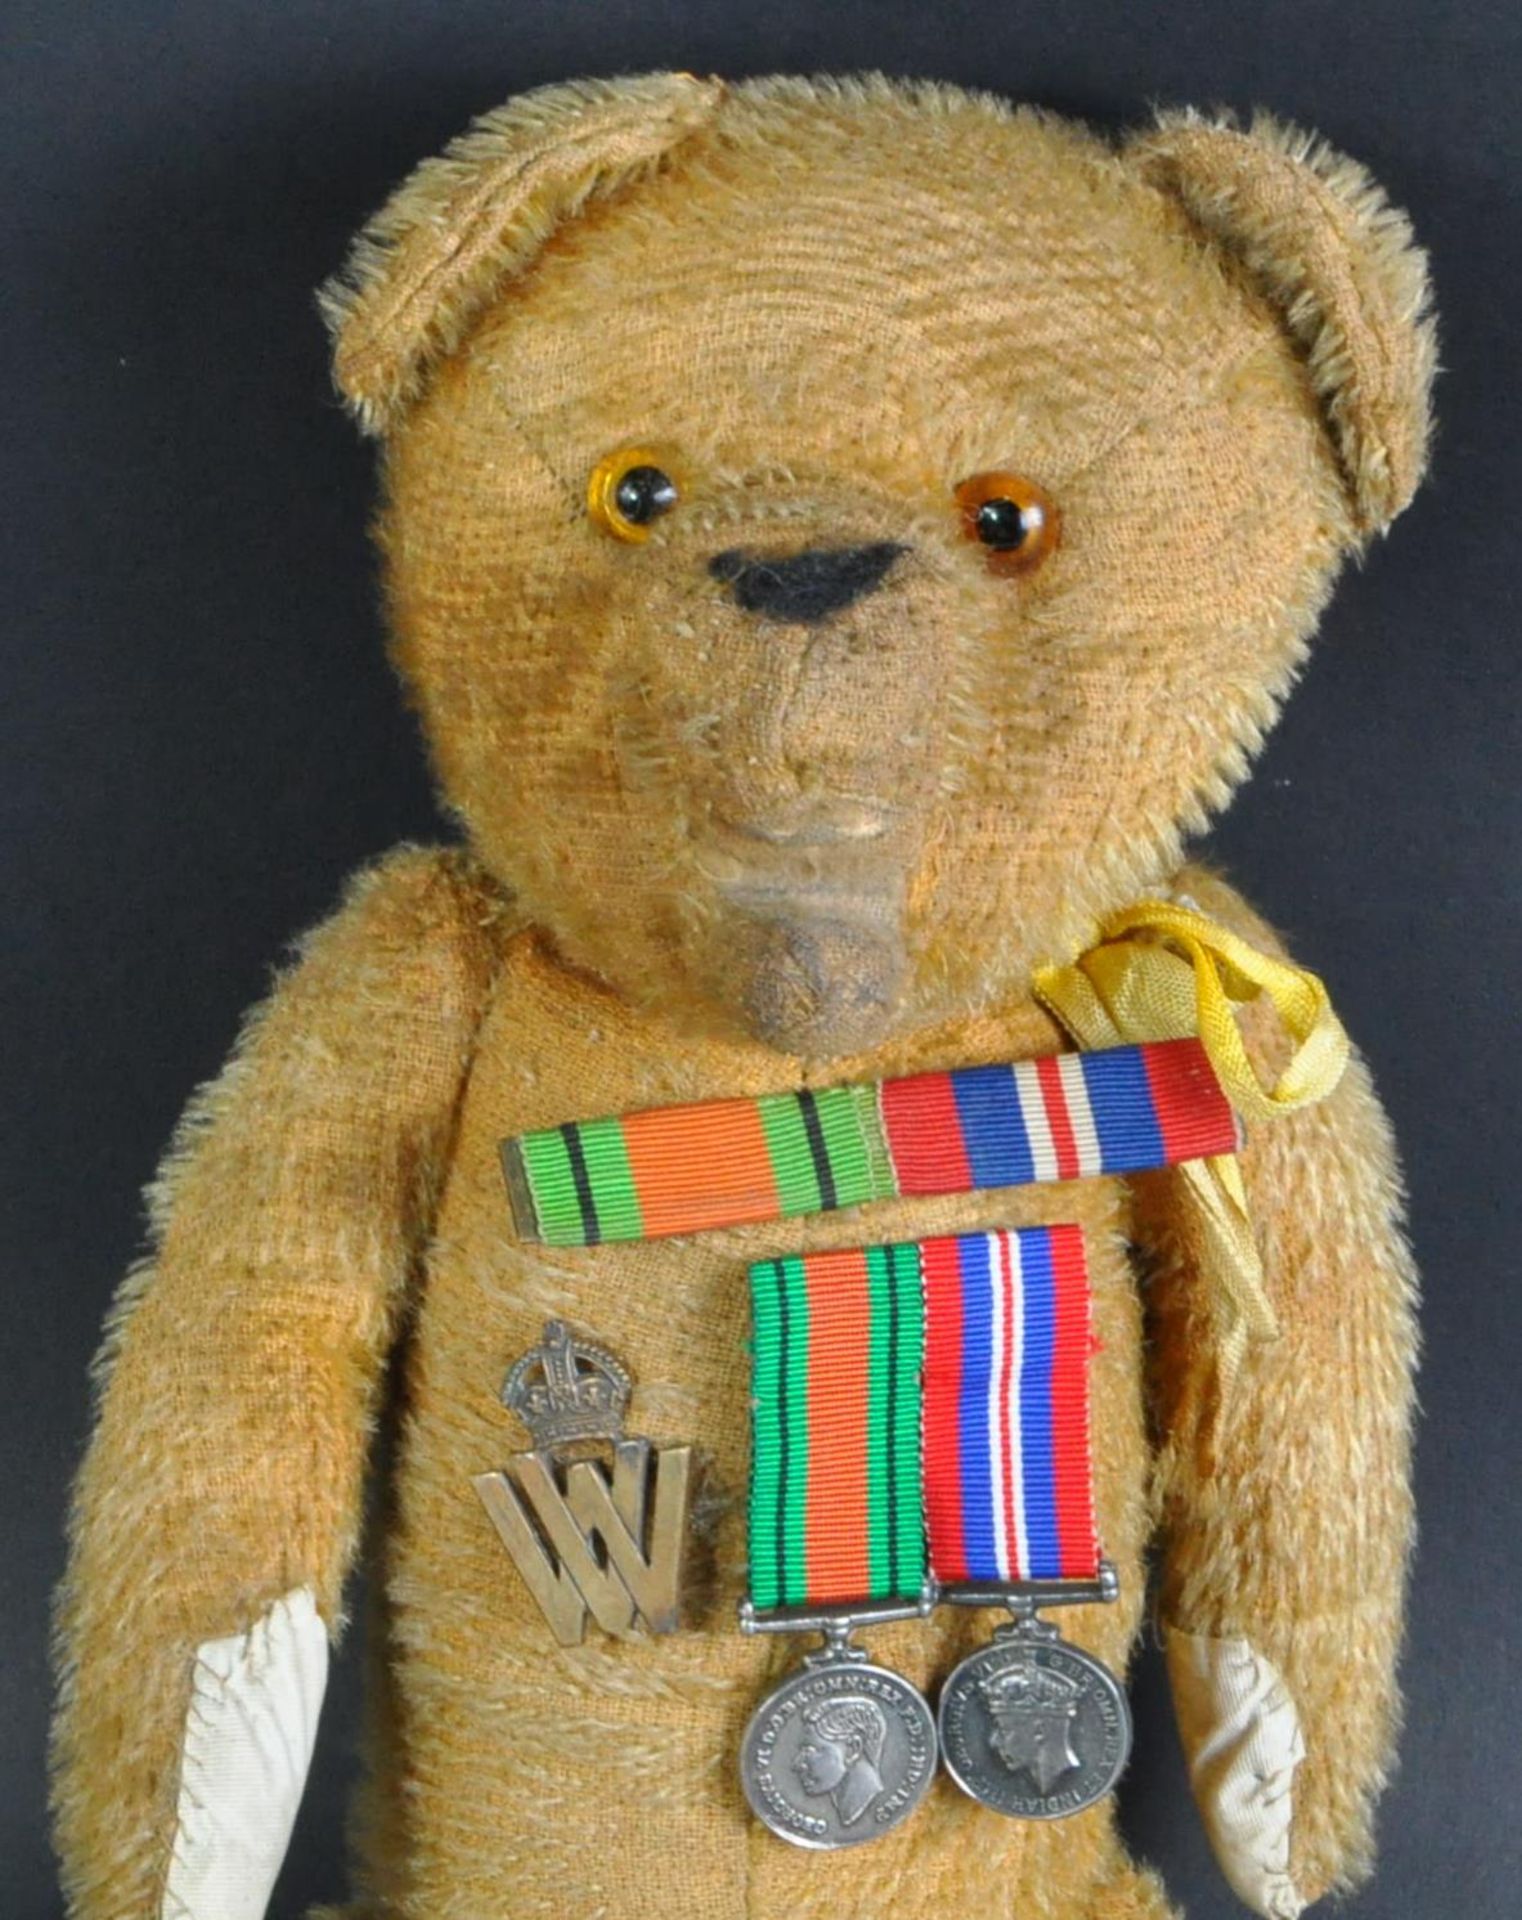 WWII SECOND WORLD WAR WVS WARTIME TEDDY BEAR WITH MEDALS & BADGE - Image 2 of 5